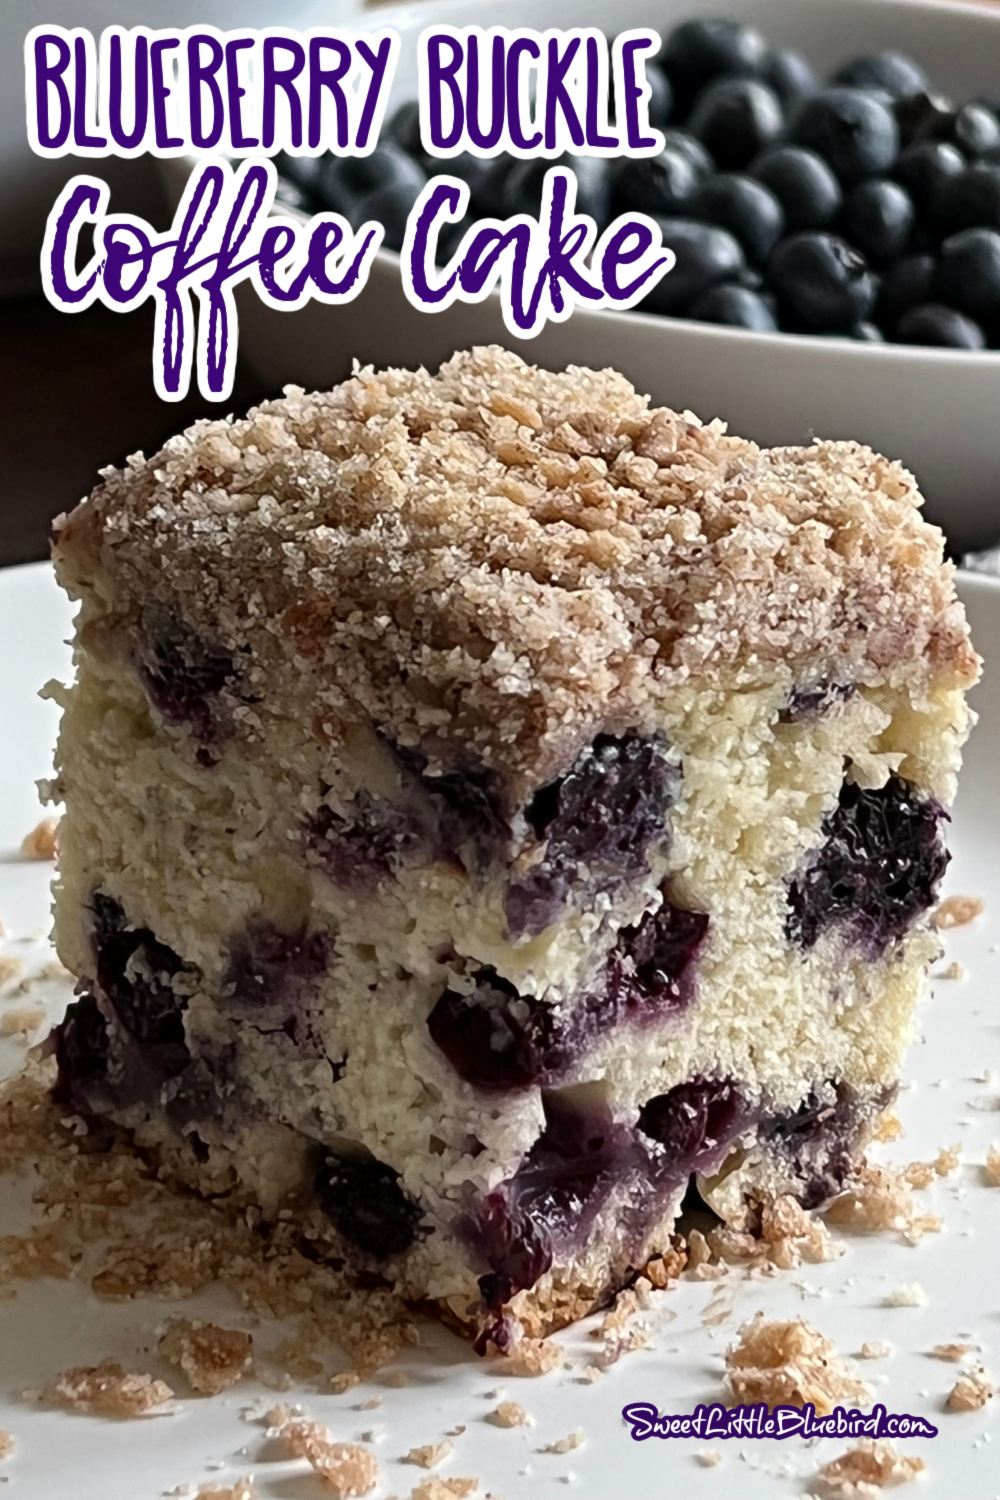 Photo of a piece of Blueberry Buckle Coffee Cake served on a white plate - by Sweet Little Bluebird.